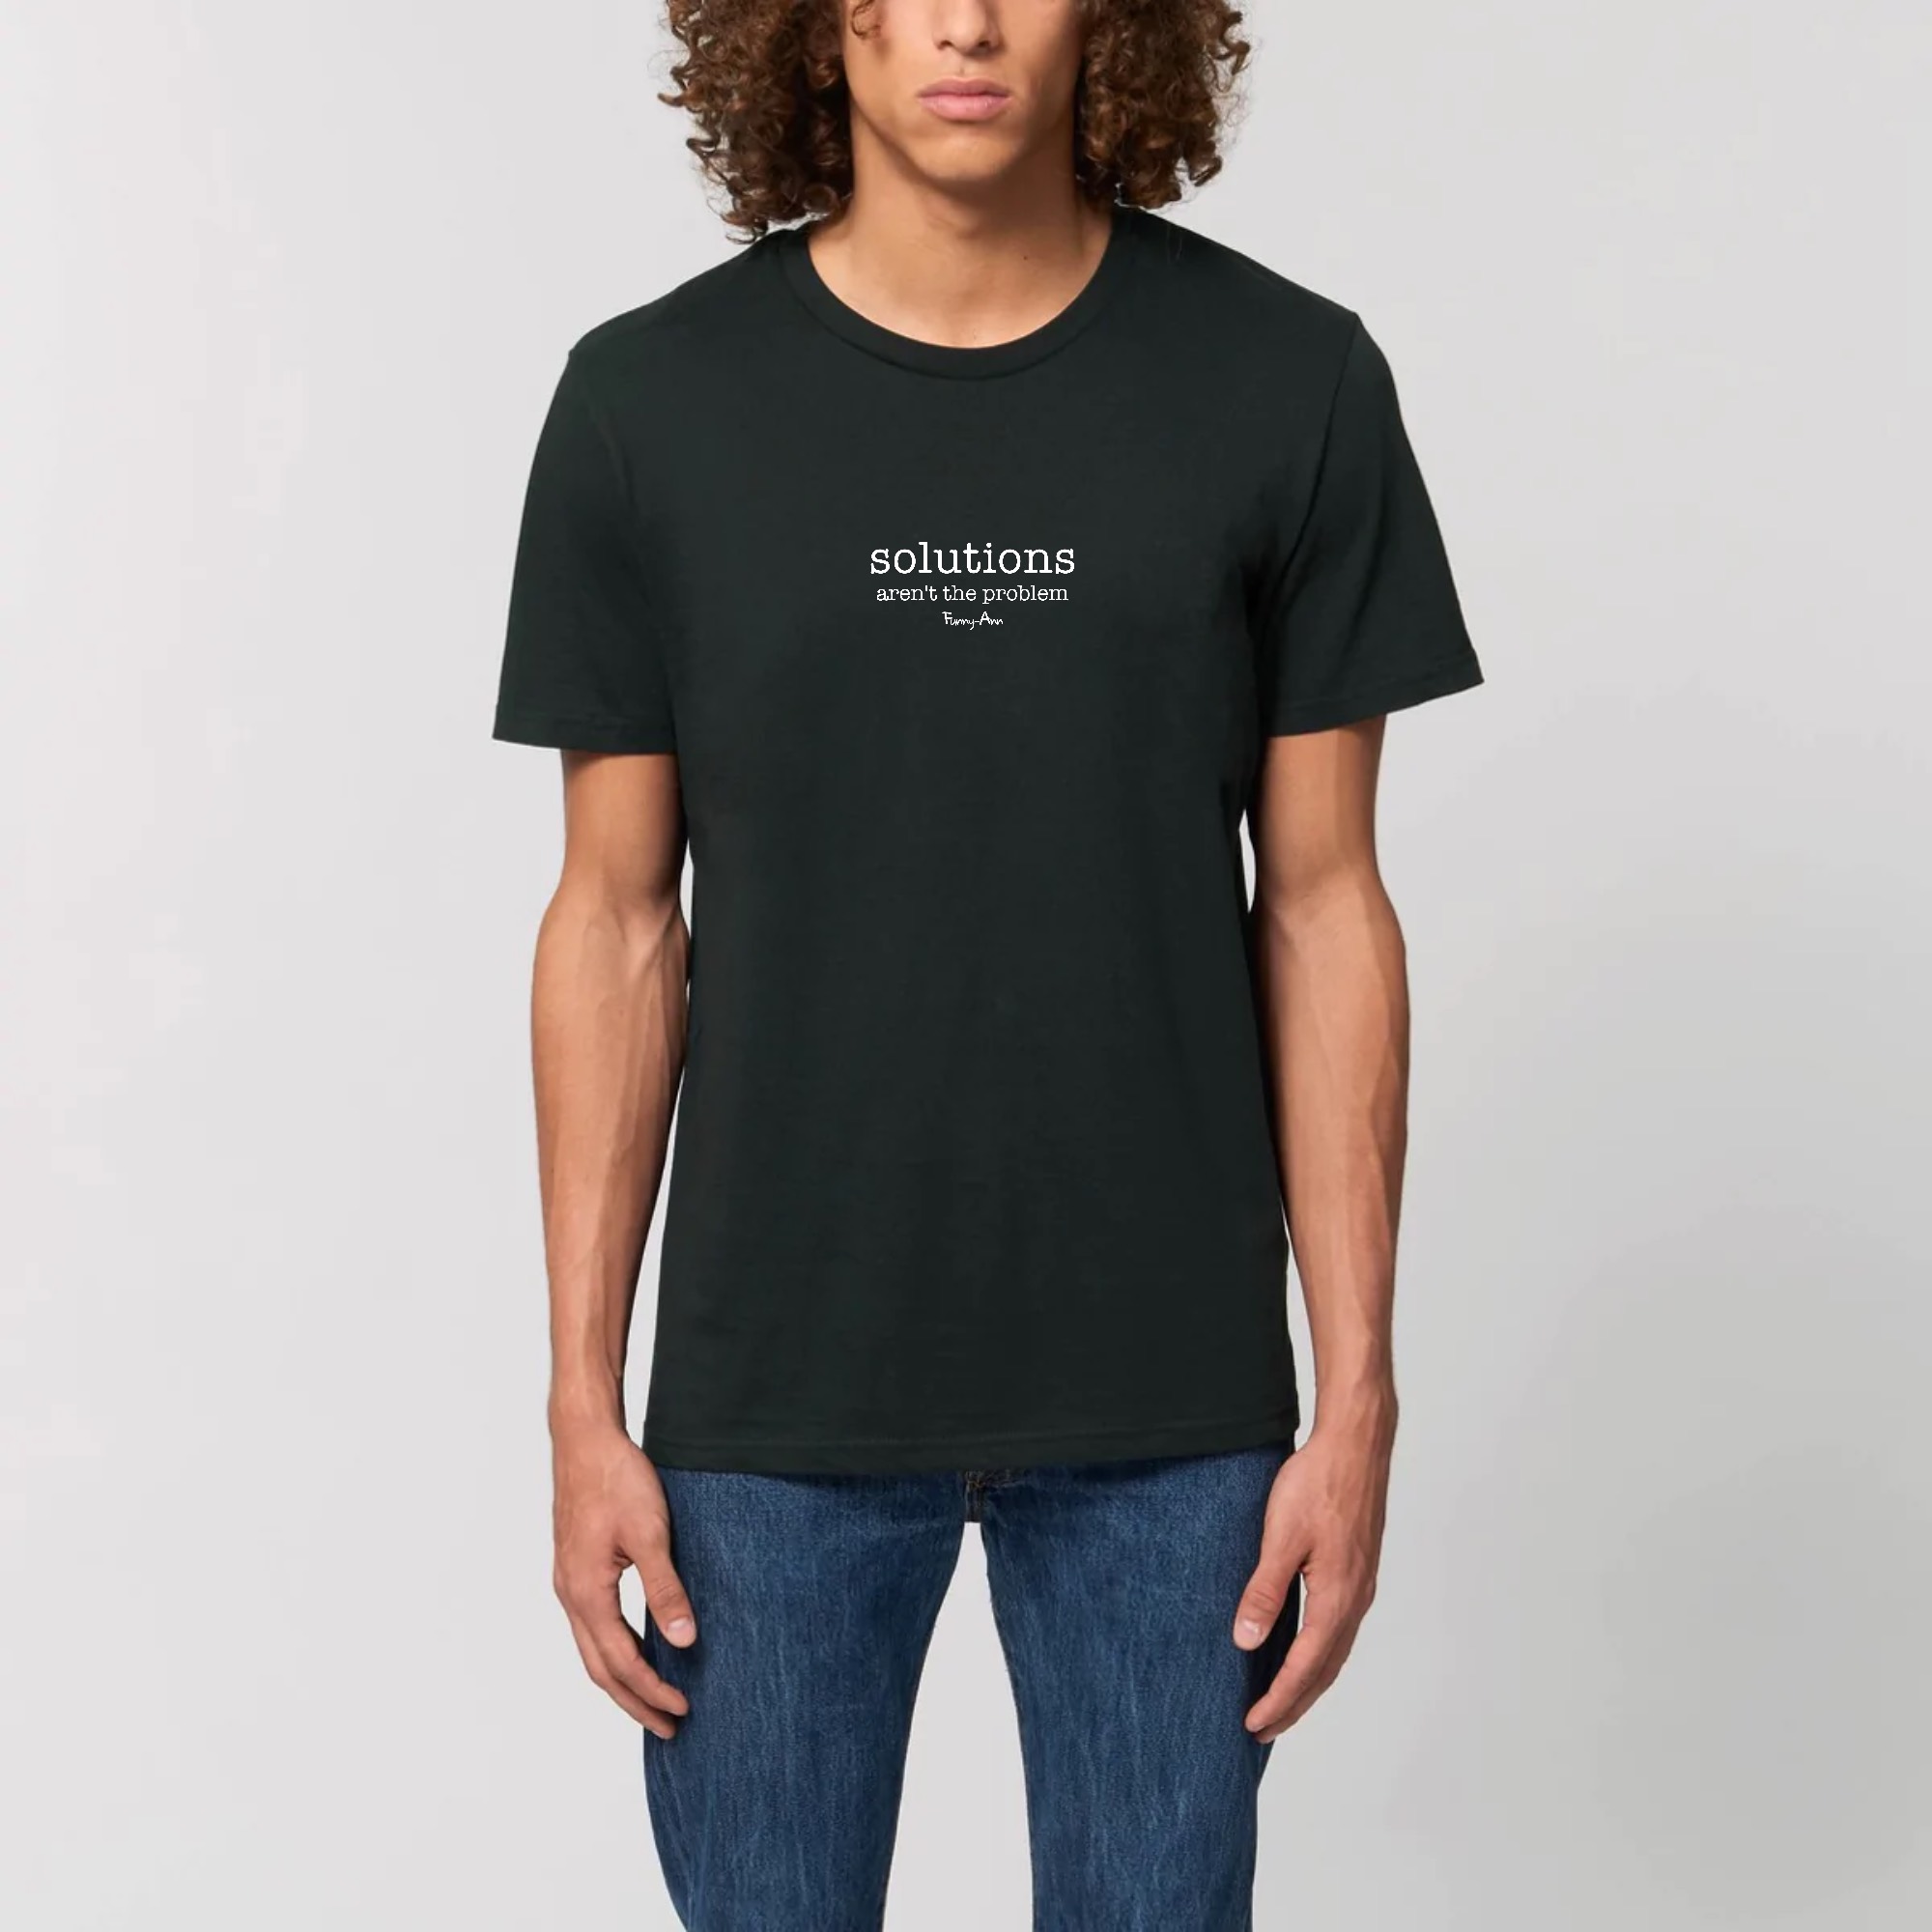 solutions aren`t the problem Tshirt